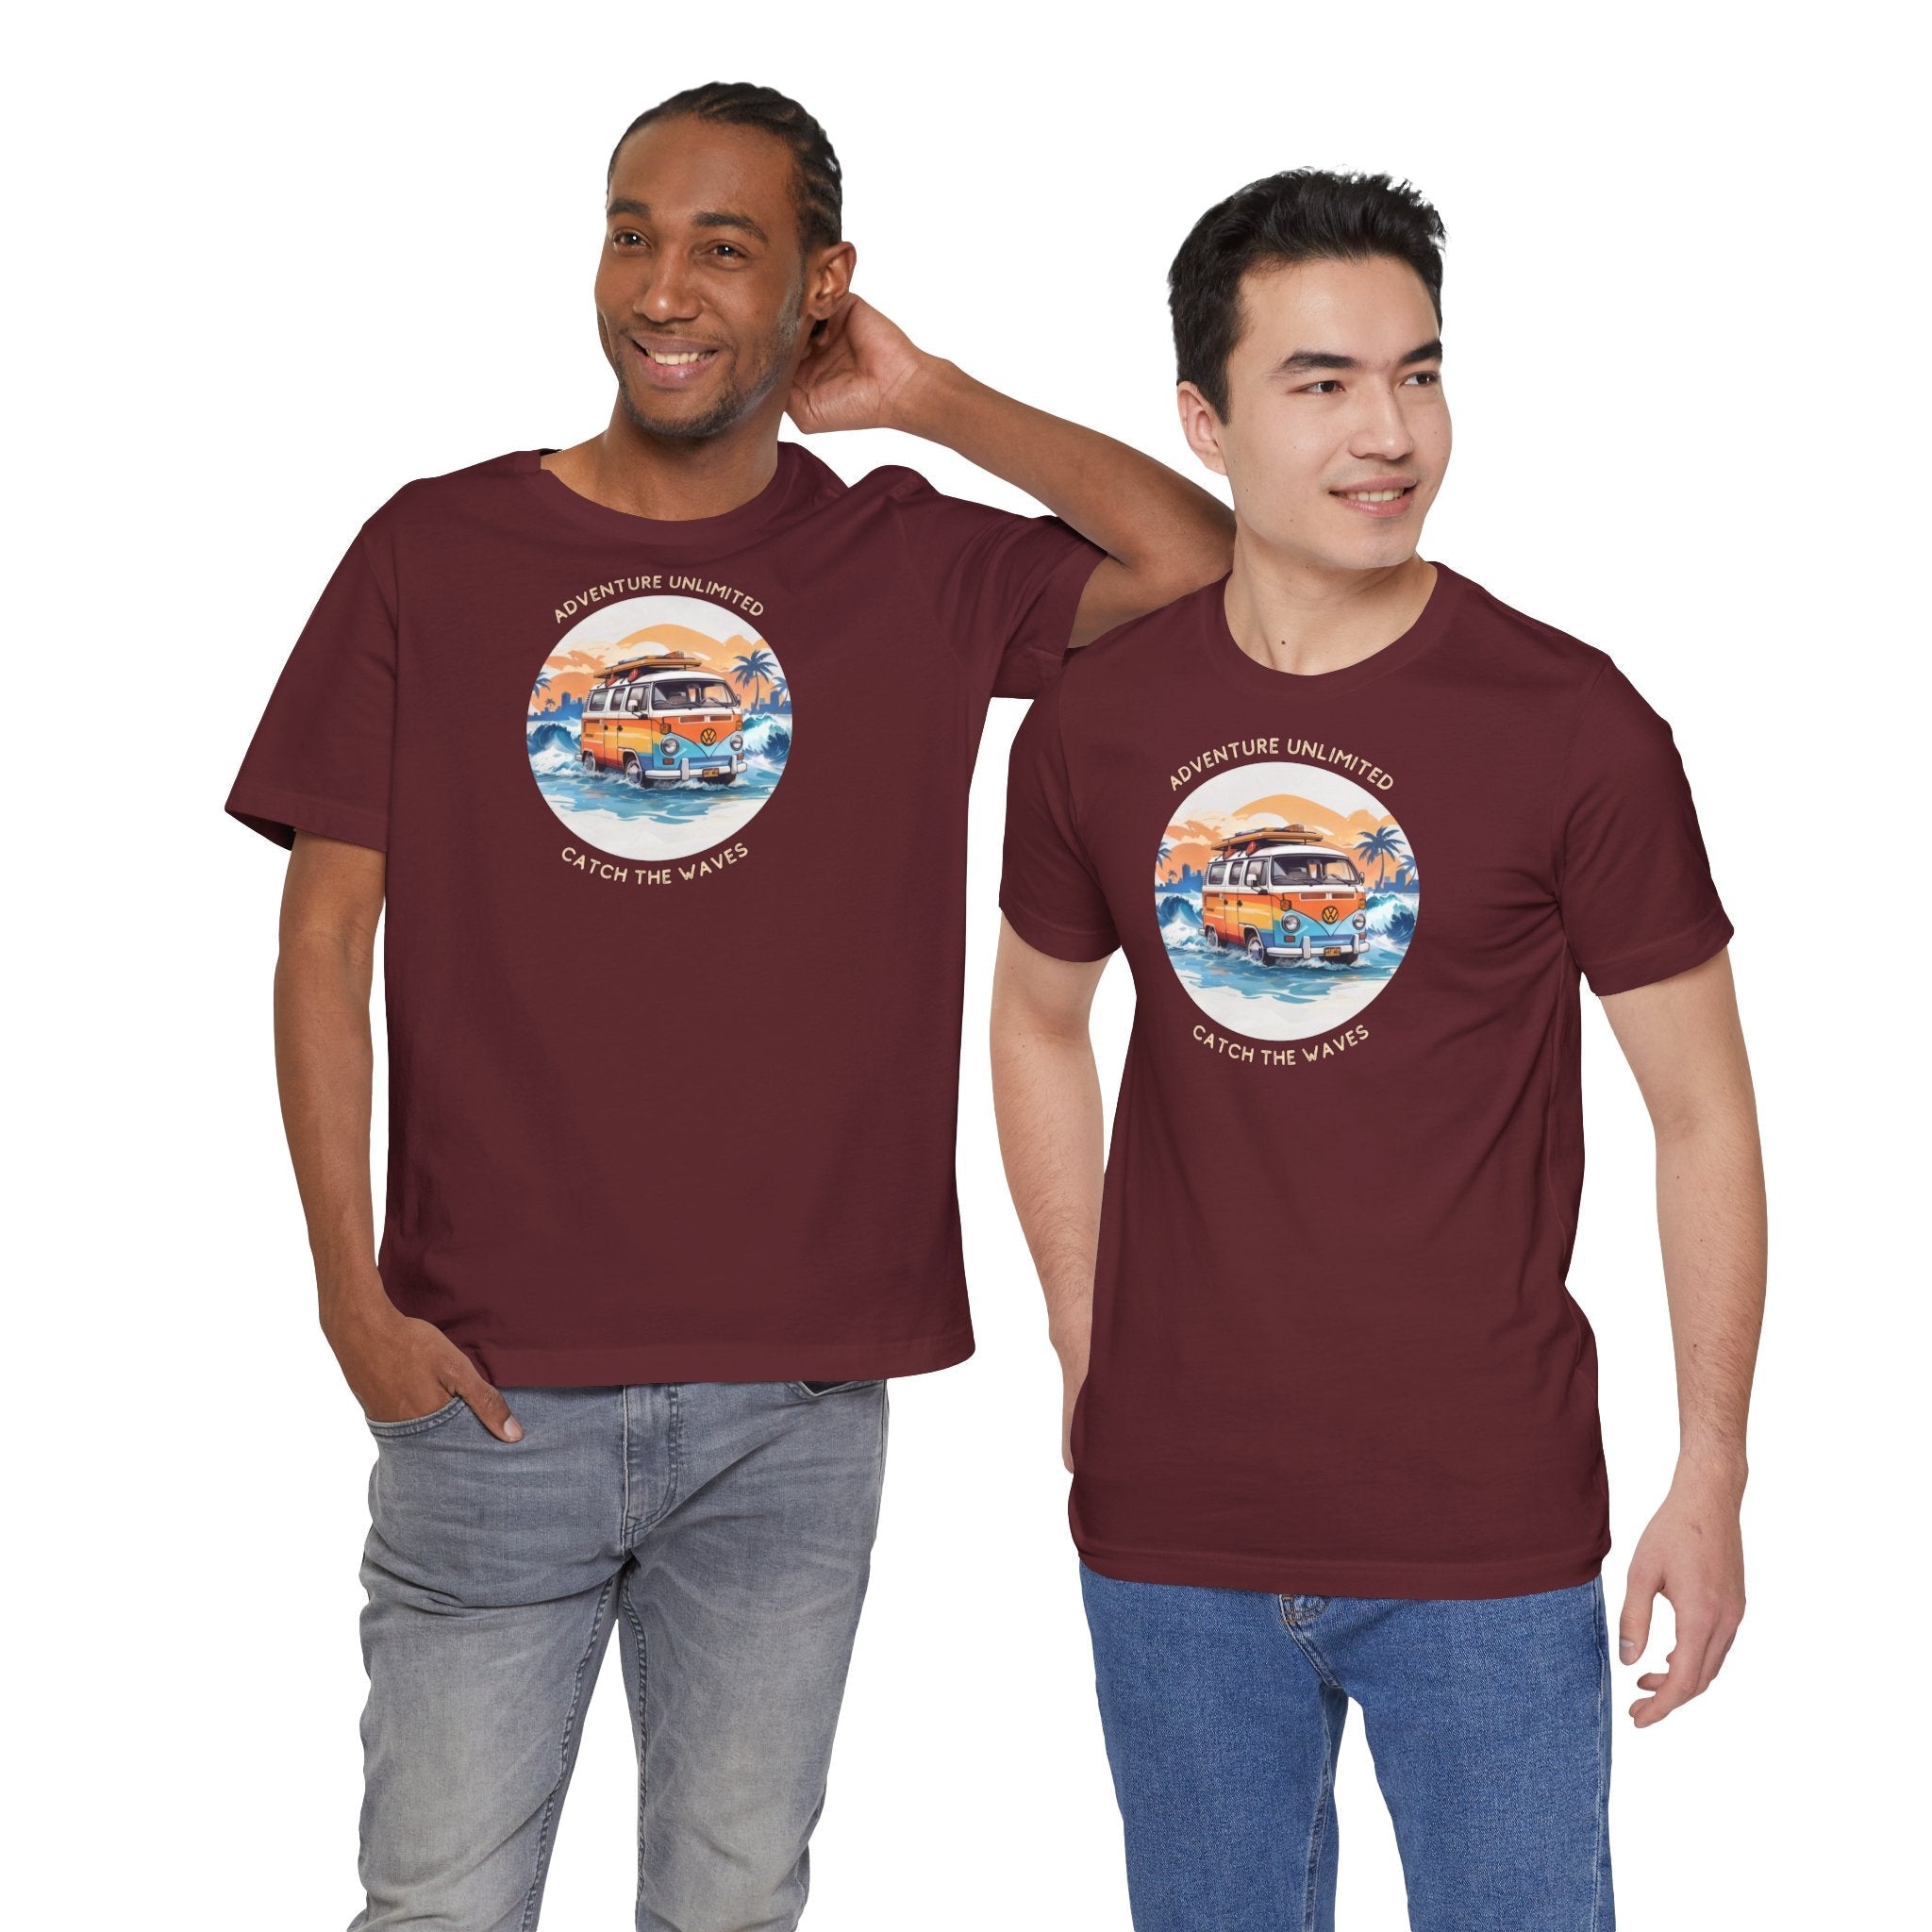 Two men in maroon Adventure Unlimited surfing T-shirts with ’the best day in the world’ printed on them